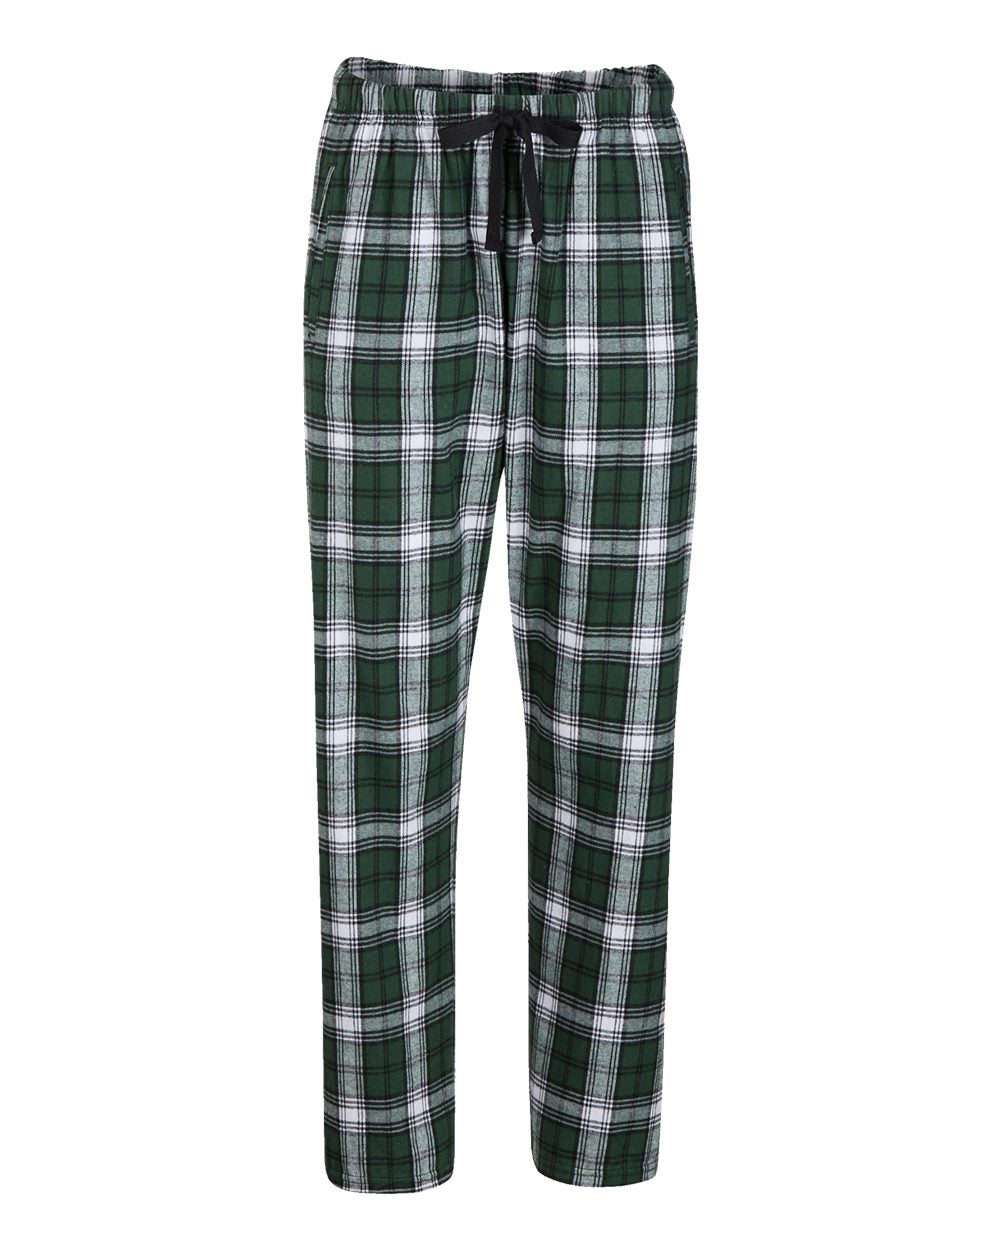 Boxercraft Ladies Haley Flannel Pants White and Green Color Pants with Custom Text